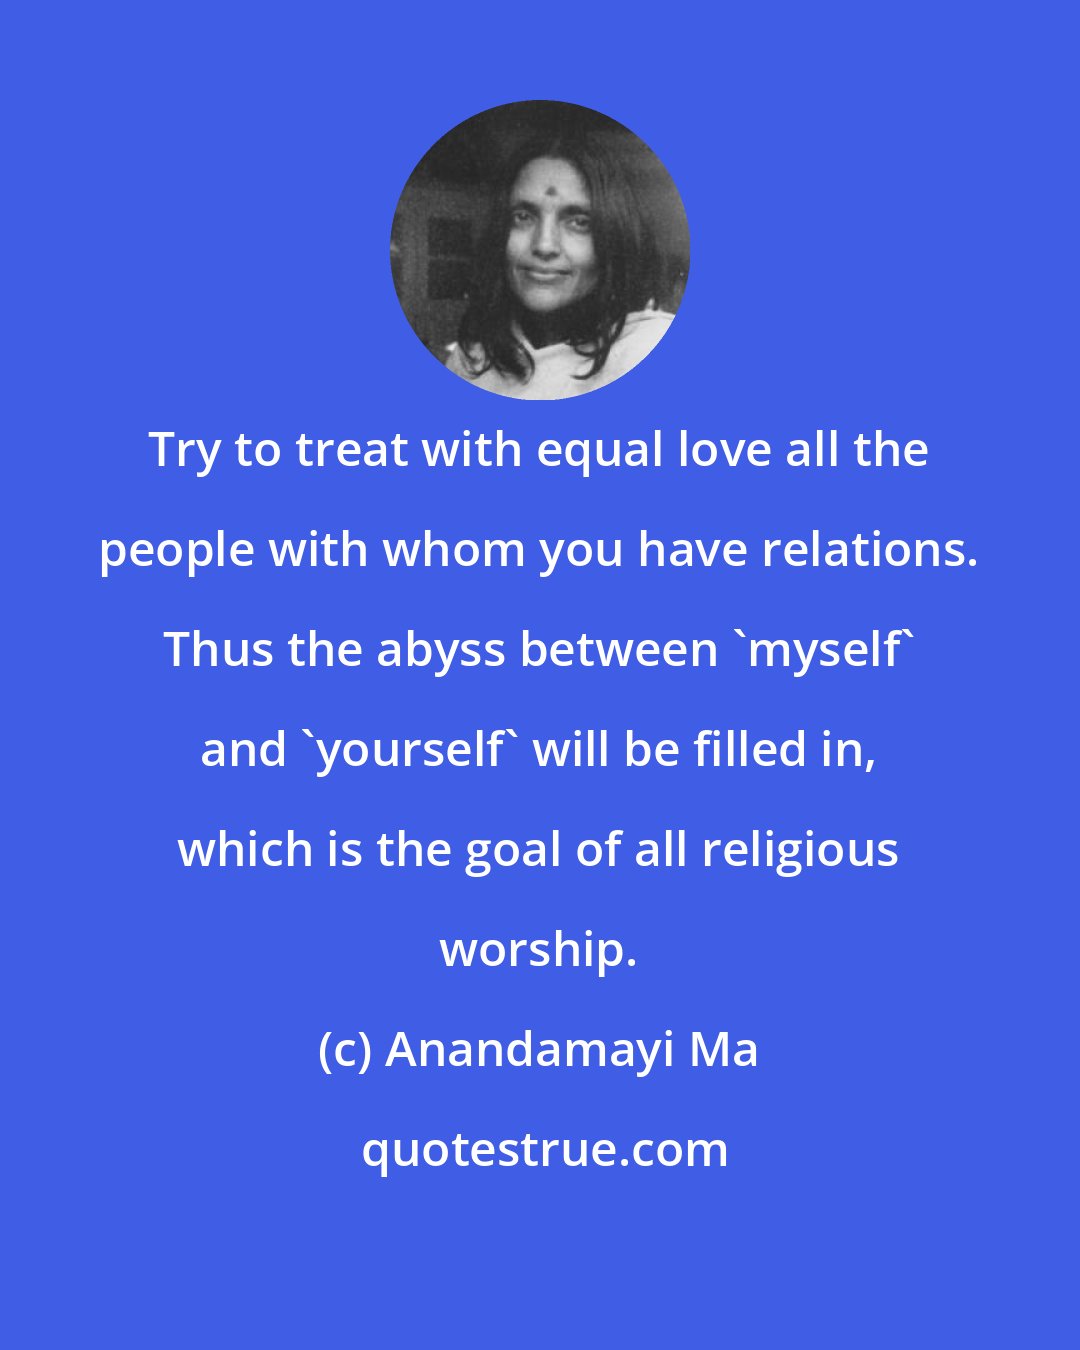 Anandamayi Ma: Try to treat with equal love all the people with whom you have relations. Thus the abyss between 'myself' and 'yourself' will be filled in, which is the goal of all religious worship.